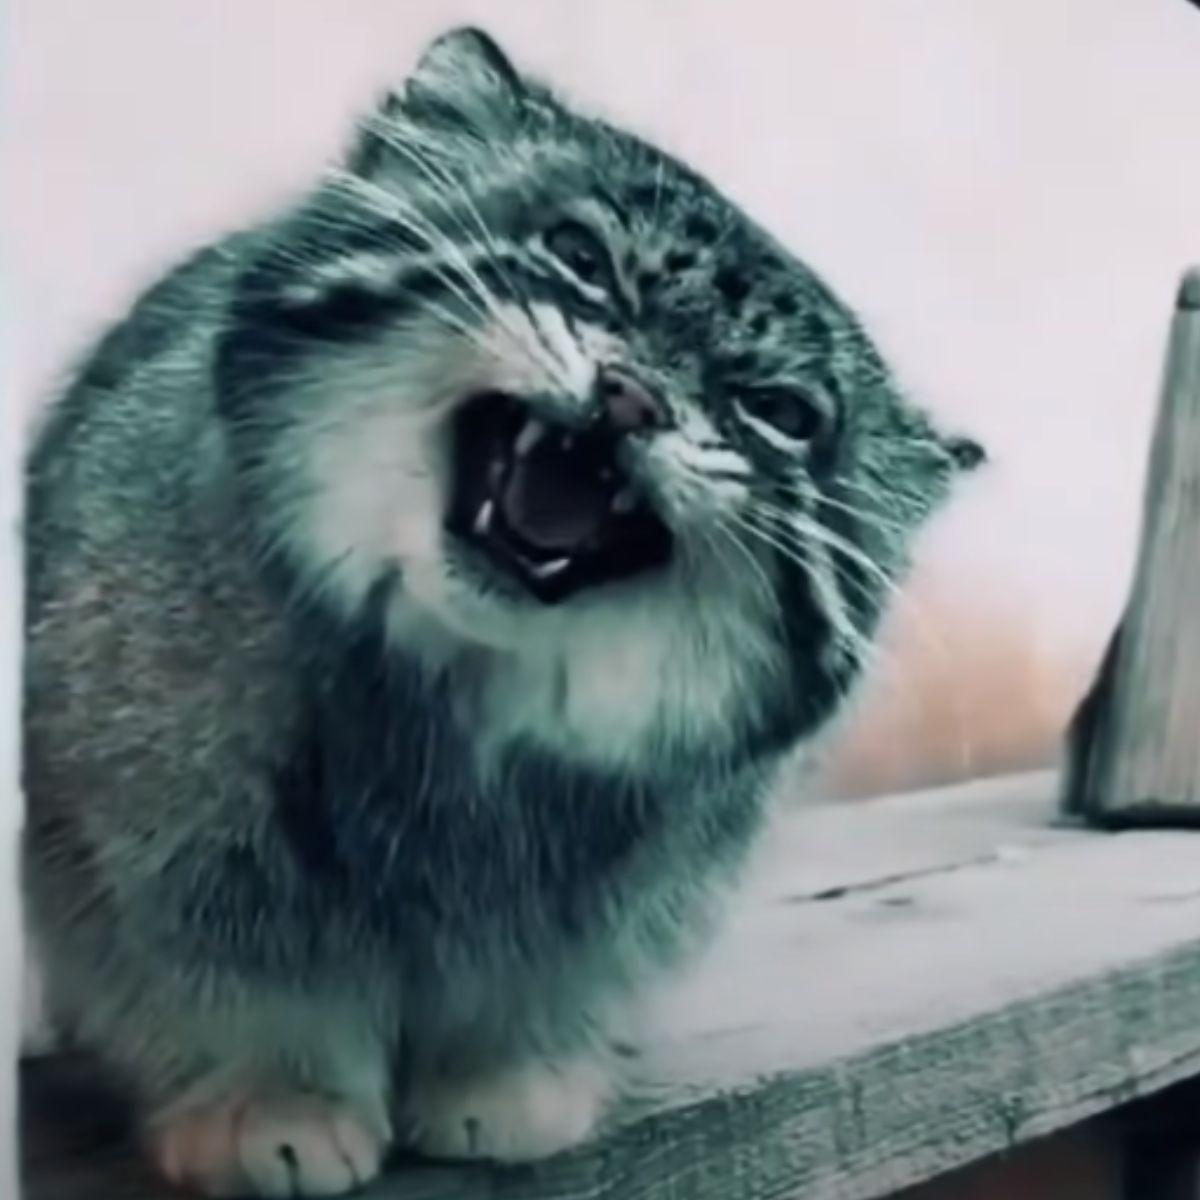 cat meowing